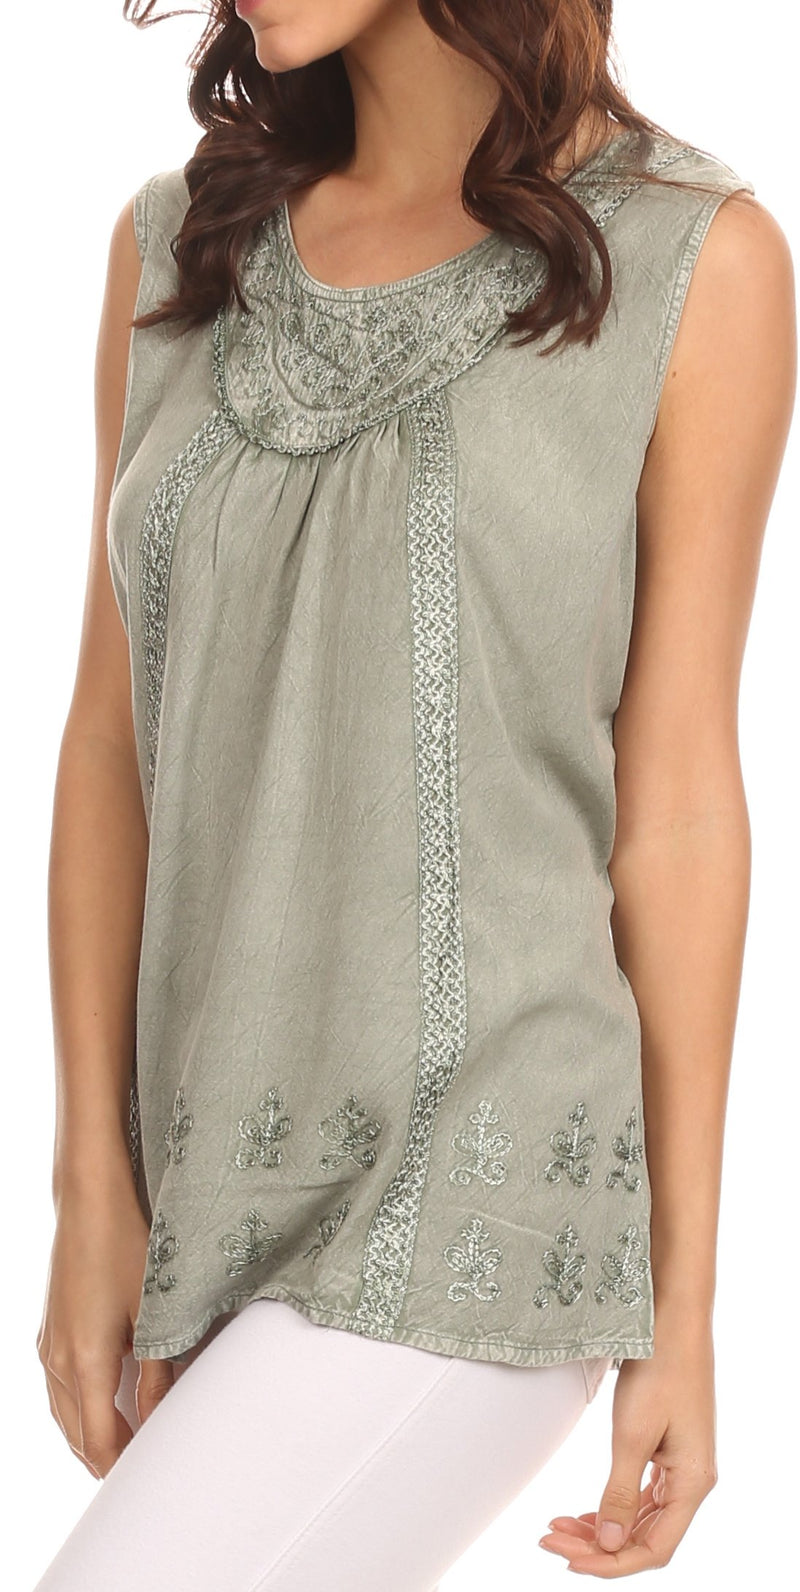 Sakkas Jil Wide Tank Top Sleeveless Embroidered Blouse With Embroidery Lace